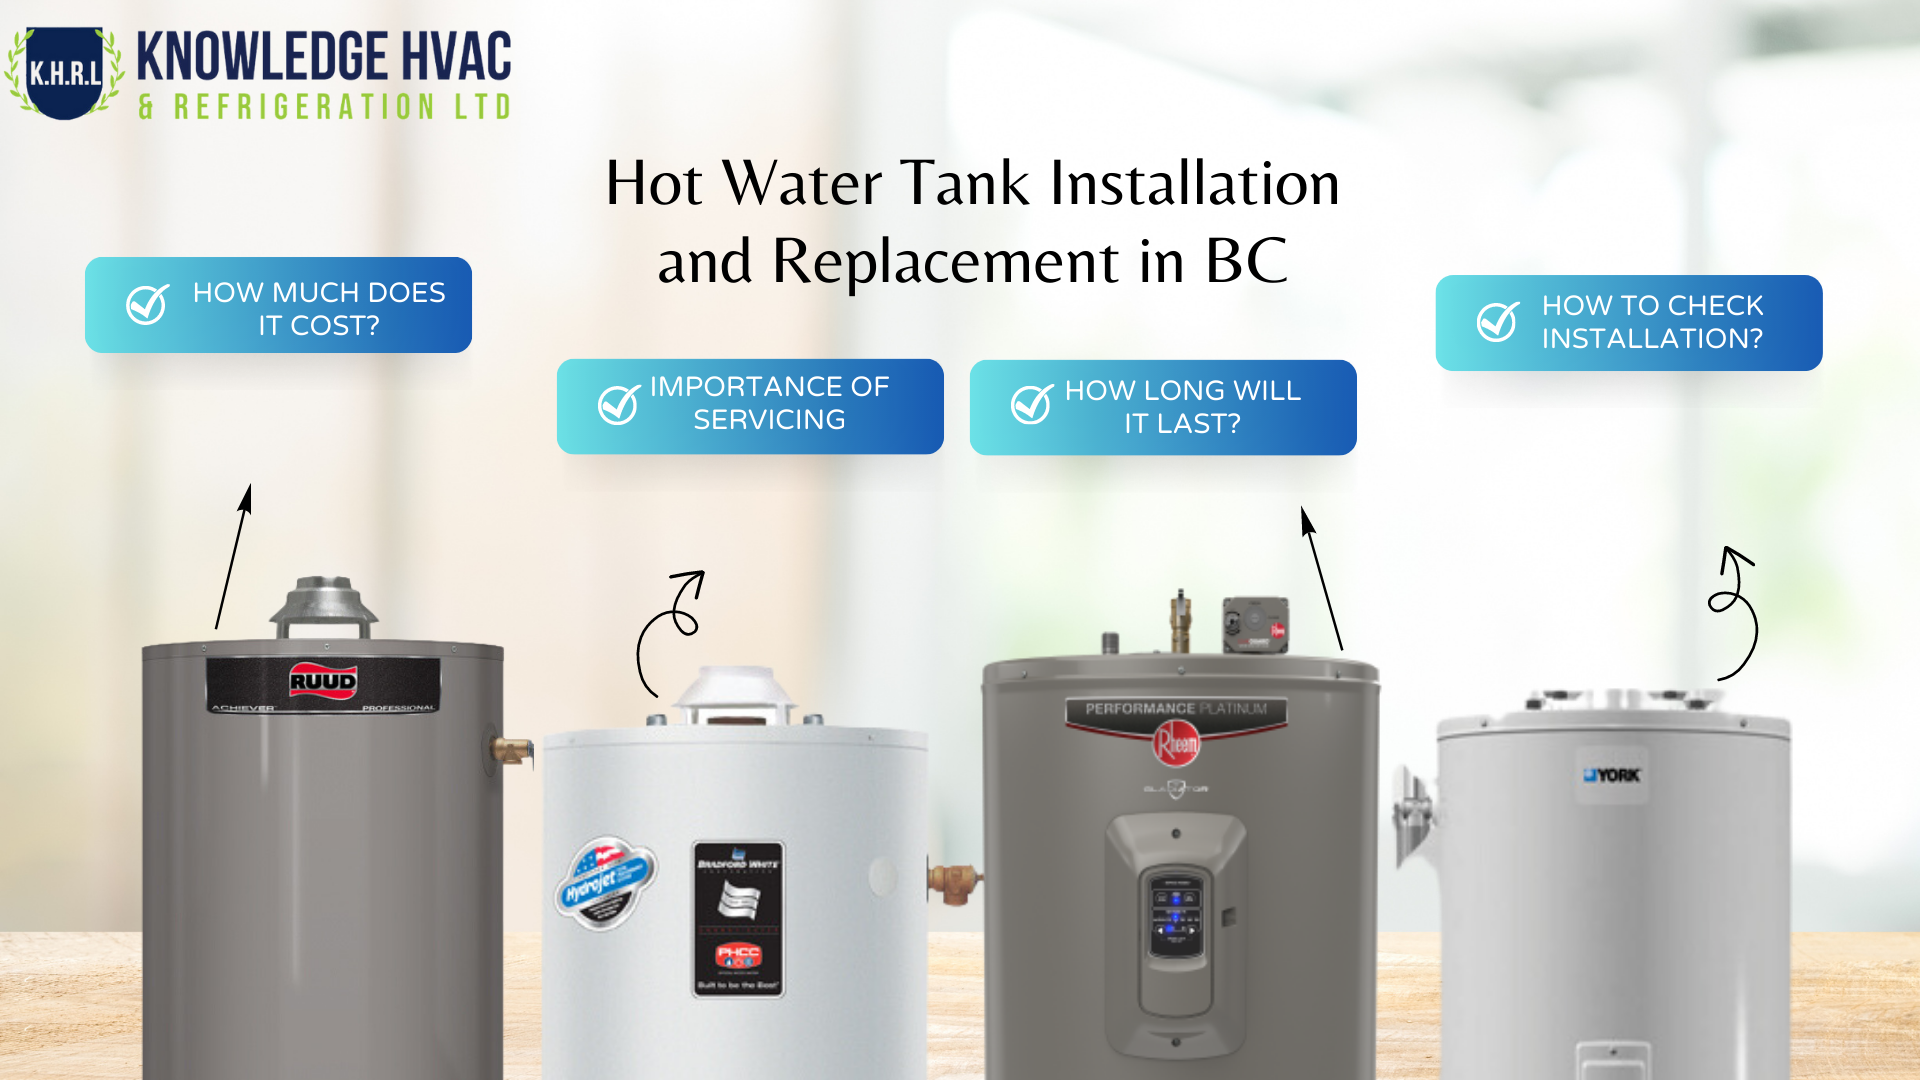 Hot Water Tank Installation and Replacement in BC